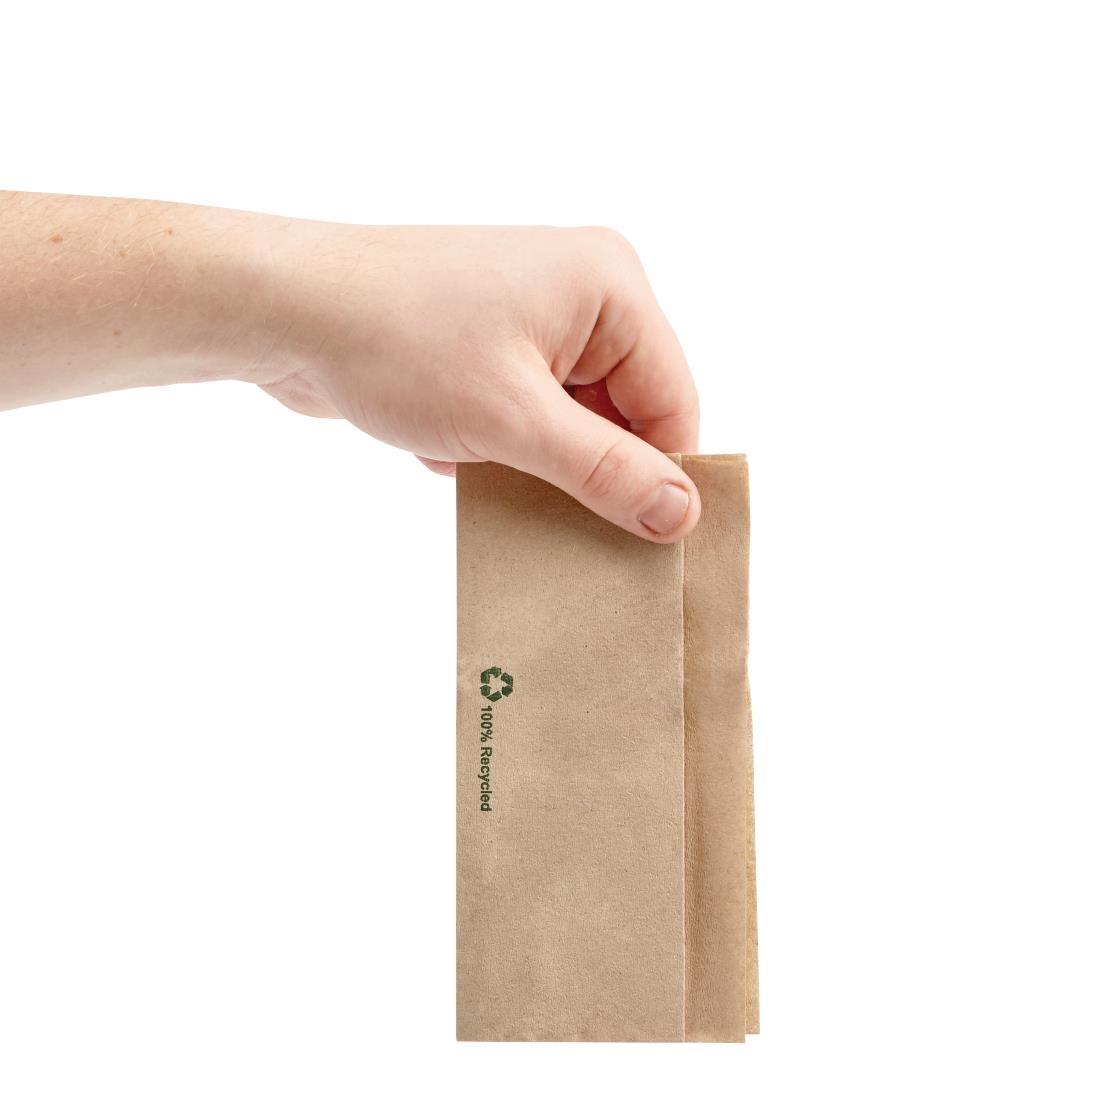 Fiesta Recyclable Recycled Lunch Napkin Kraft 32x30cm 1ply Dispenser Fold (Pack of 6000) - FE211  - 3